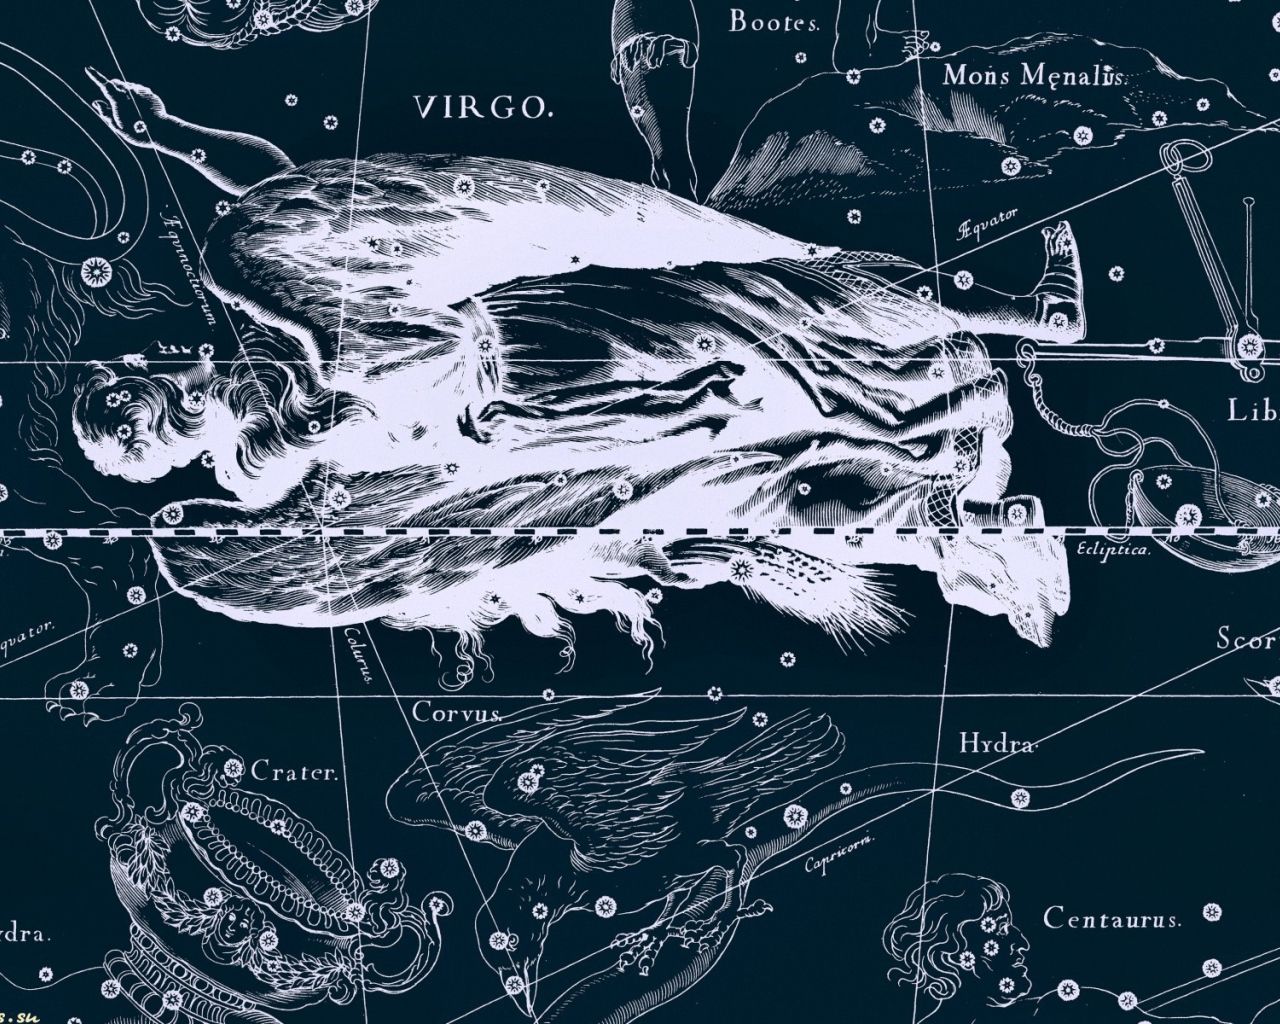 A black and white map of the stars - Virgo